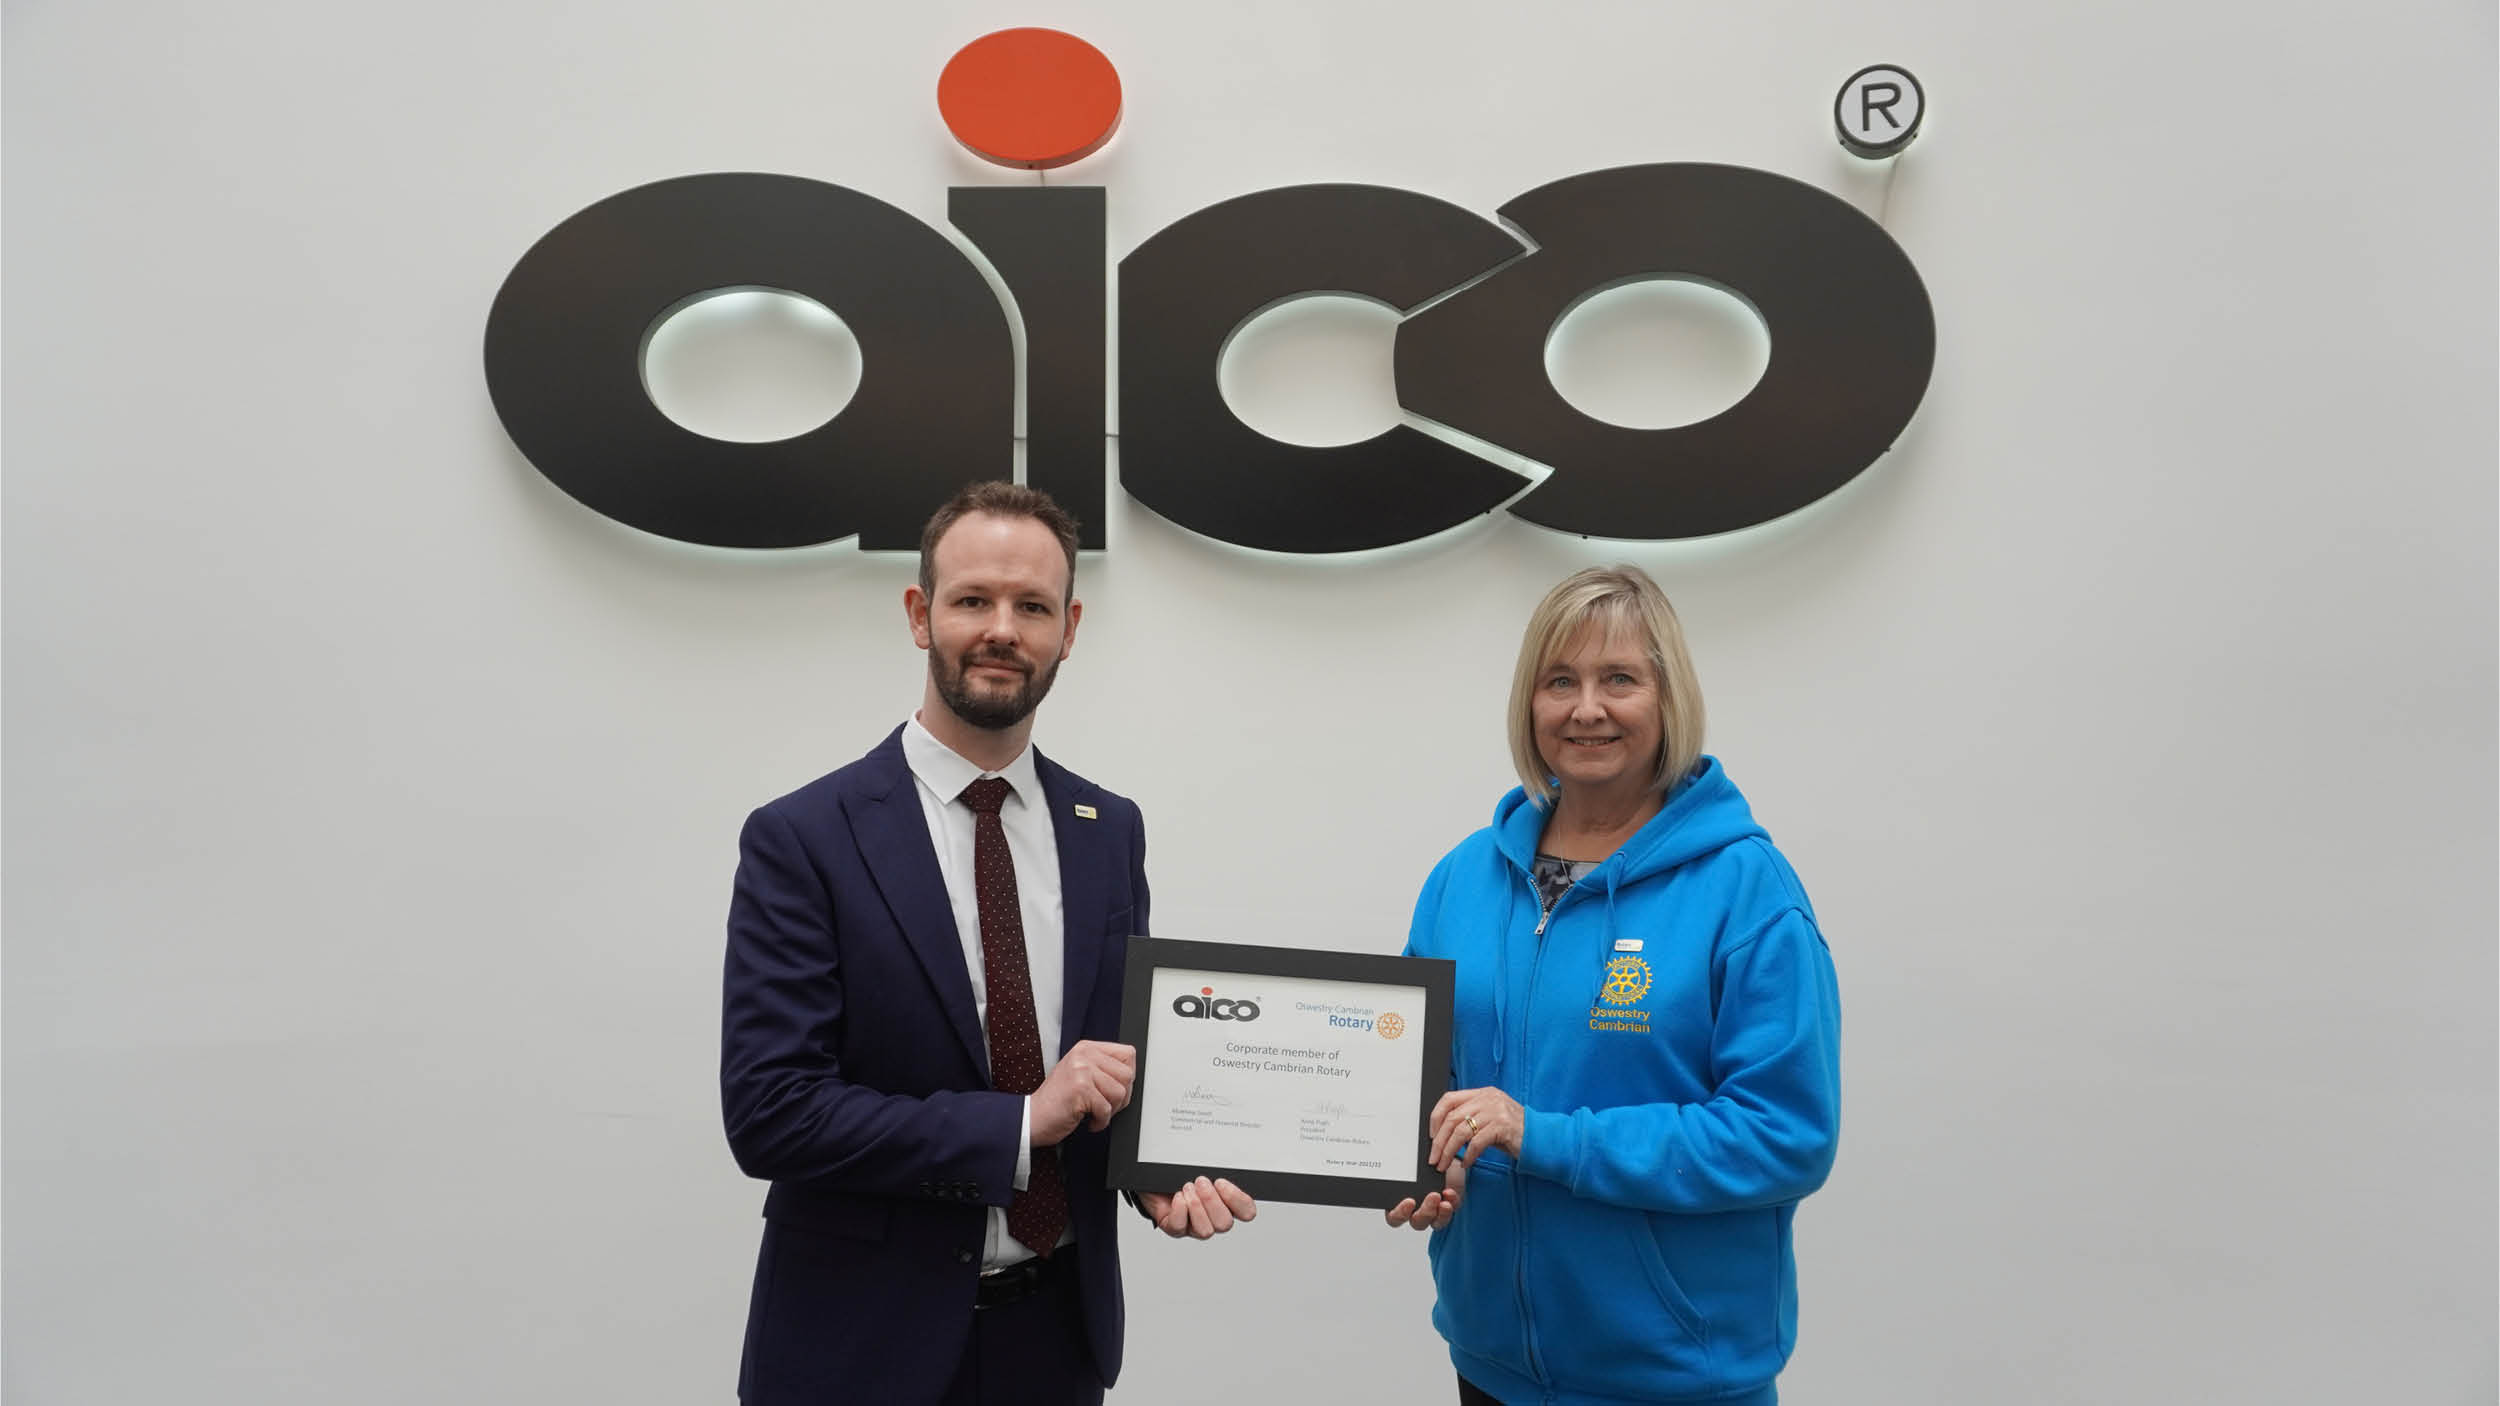 (From Left to Right) Matthew Small, Aico’s Commercial & Finance Director with Rotary President Anna Pugh from Oswestry Cambrian Rotary